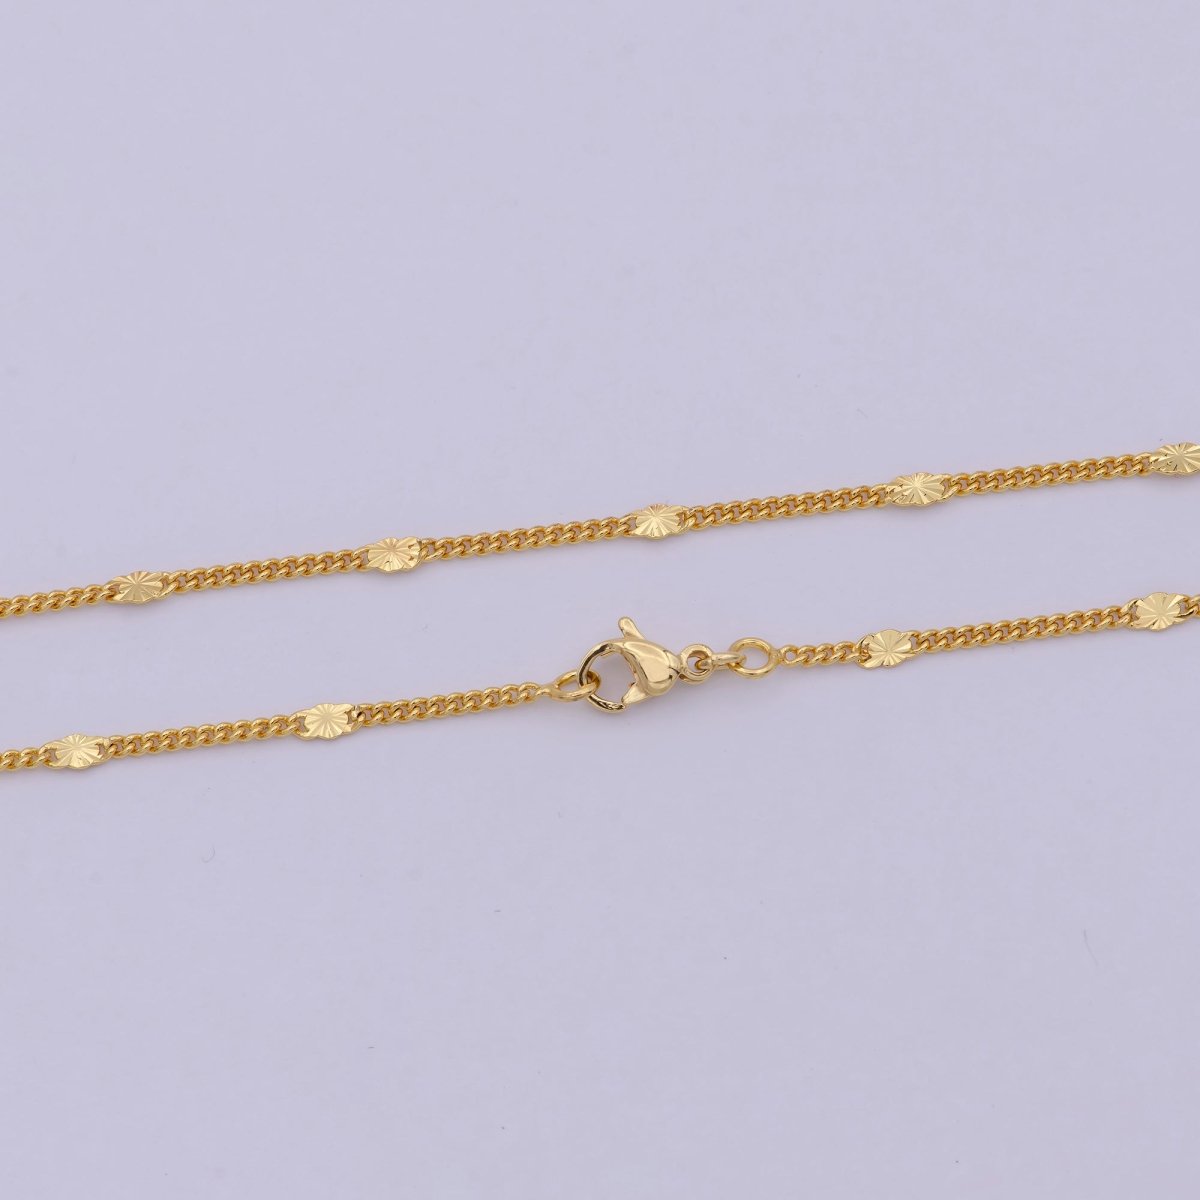 24K Gold Filled 1.5mm Curb Chain 15.5, 18 inch Finished Necklace For Wholesale Necklace Dainty Jewelry Making Supplies | WA-521 Clearance Pricing - DLUXCA